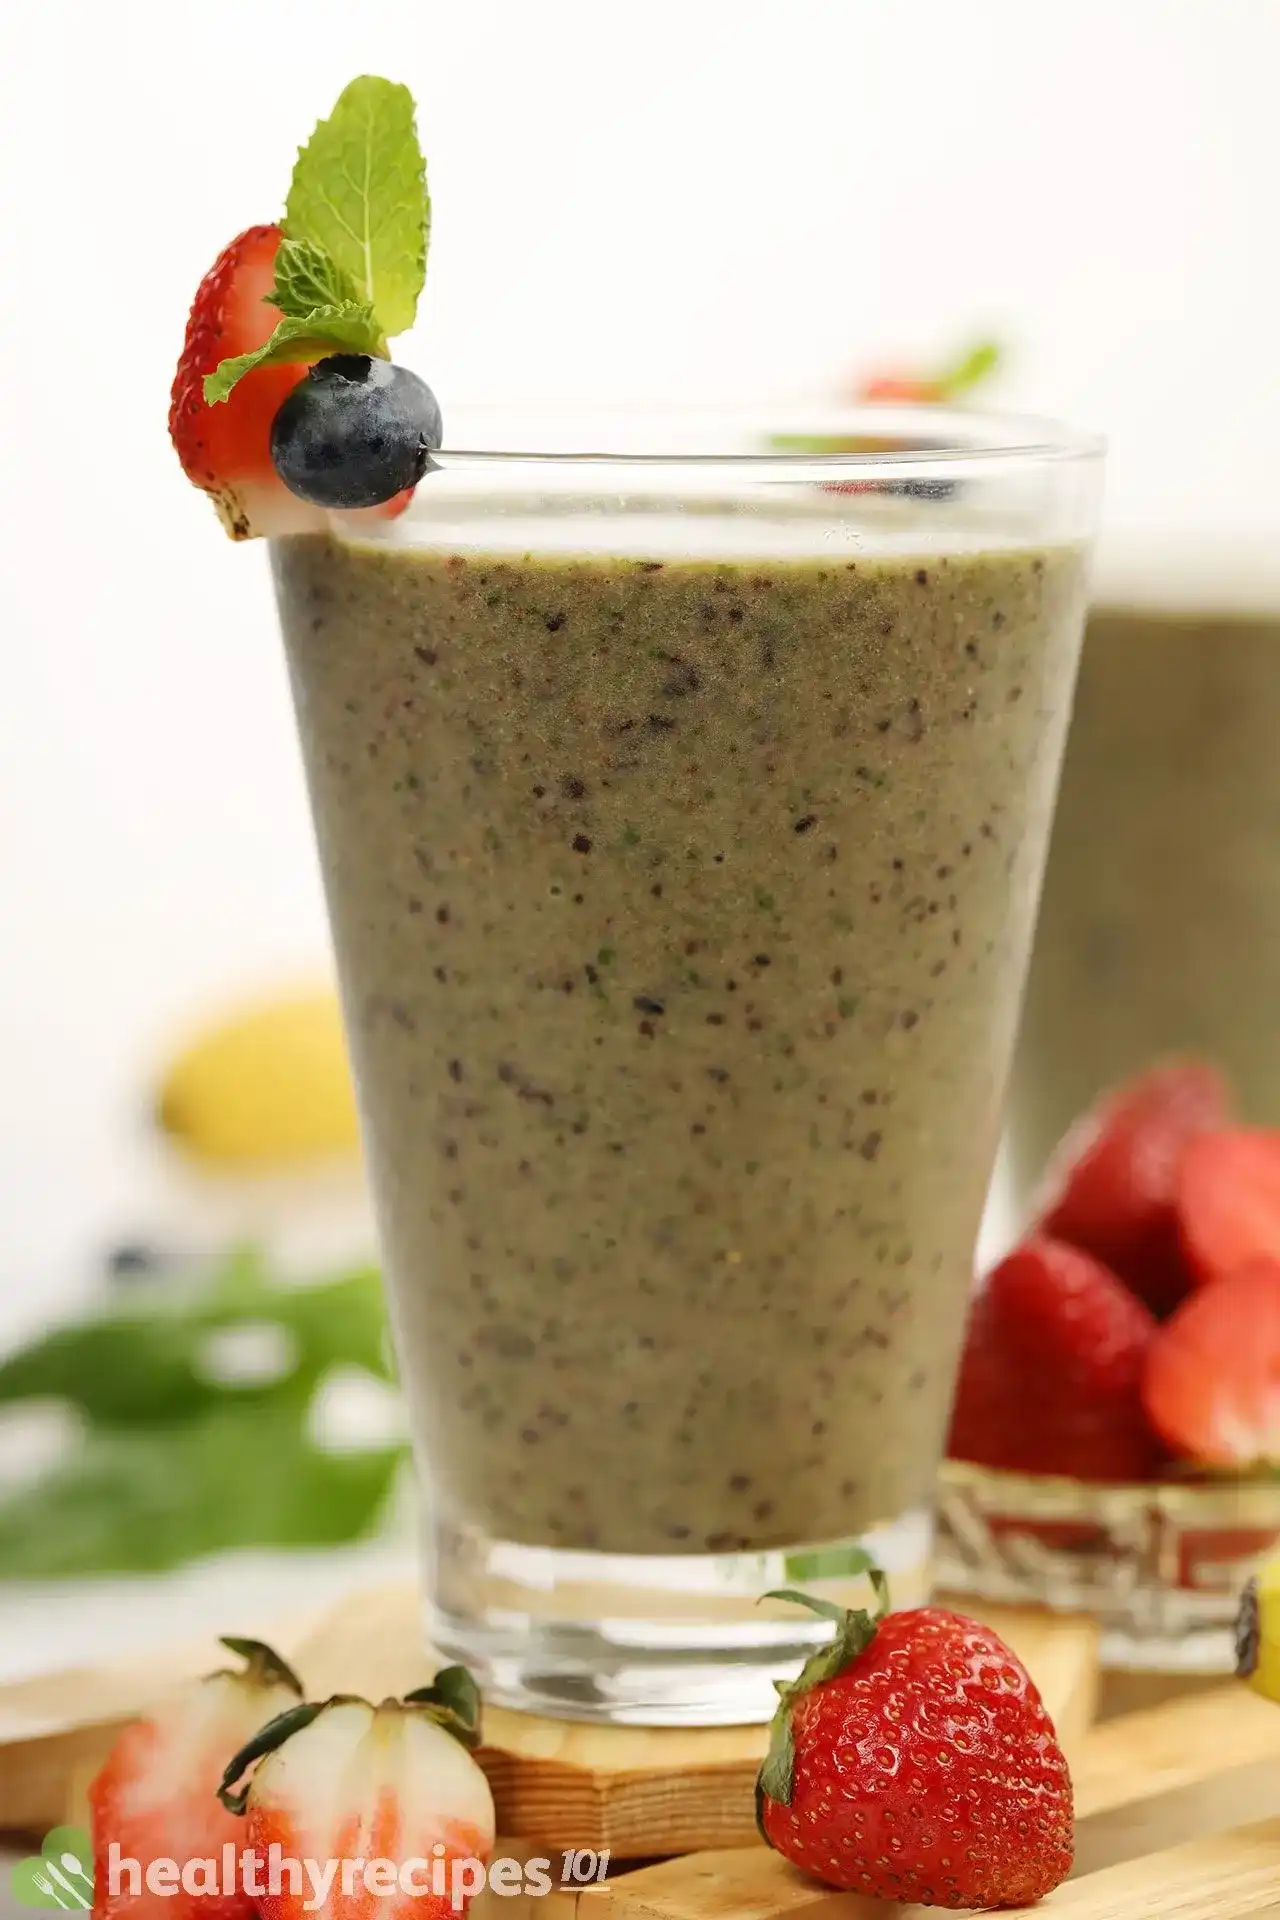 Spinach Berry Smoothie Recipe - A Healthy Drink That Tastes Great